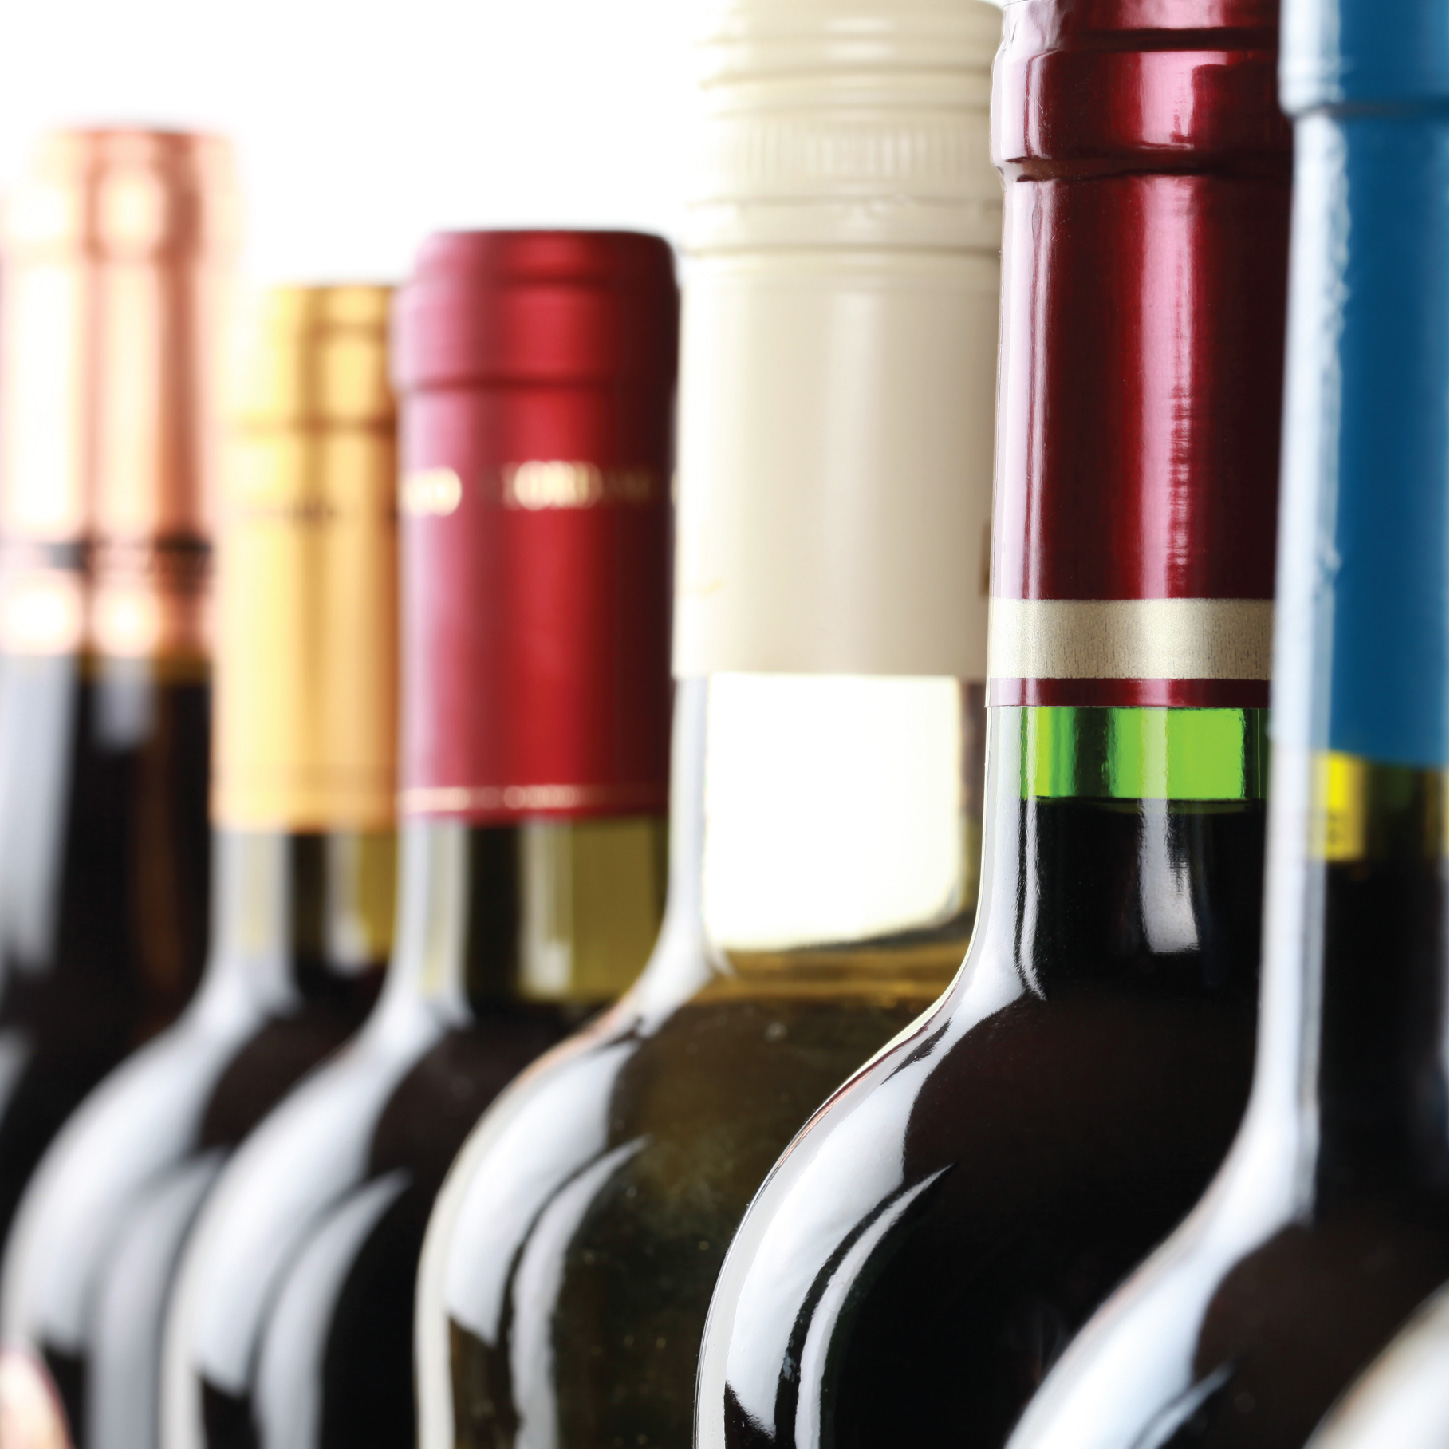 Quality wines from around the globe guaranteed